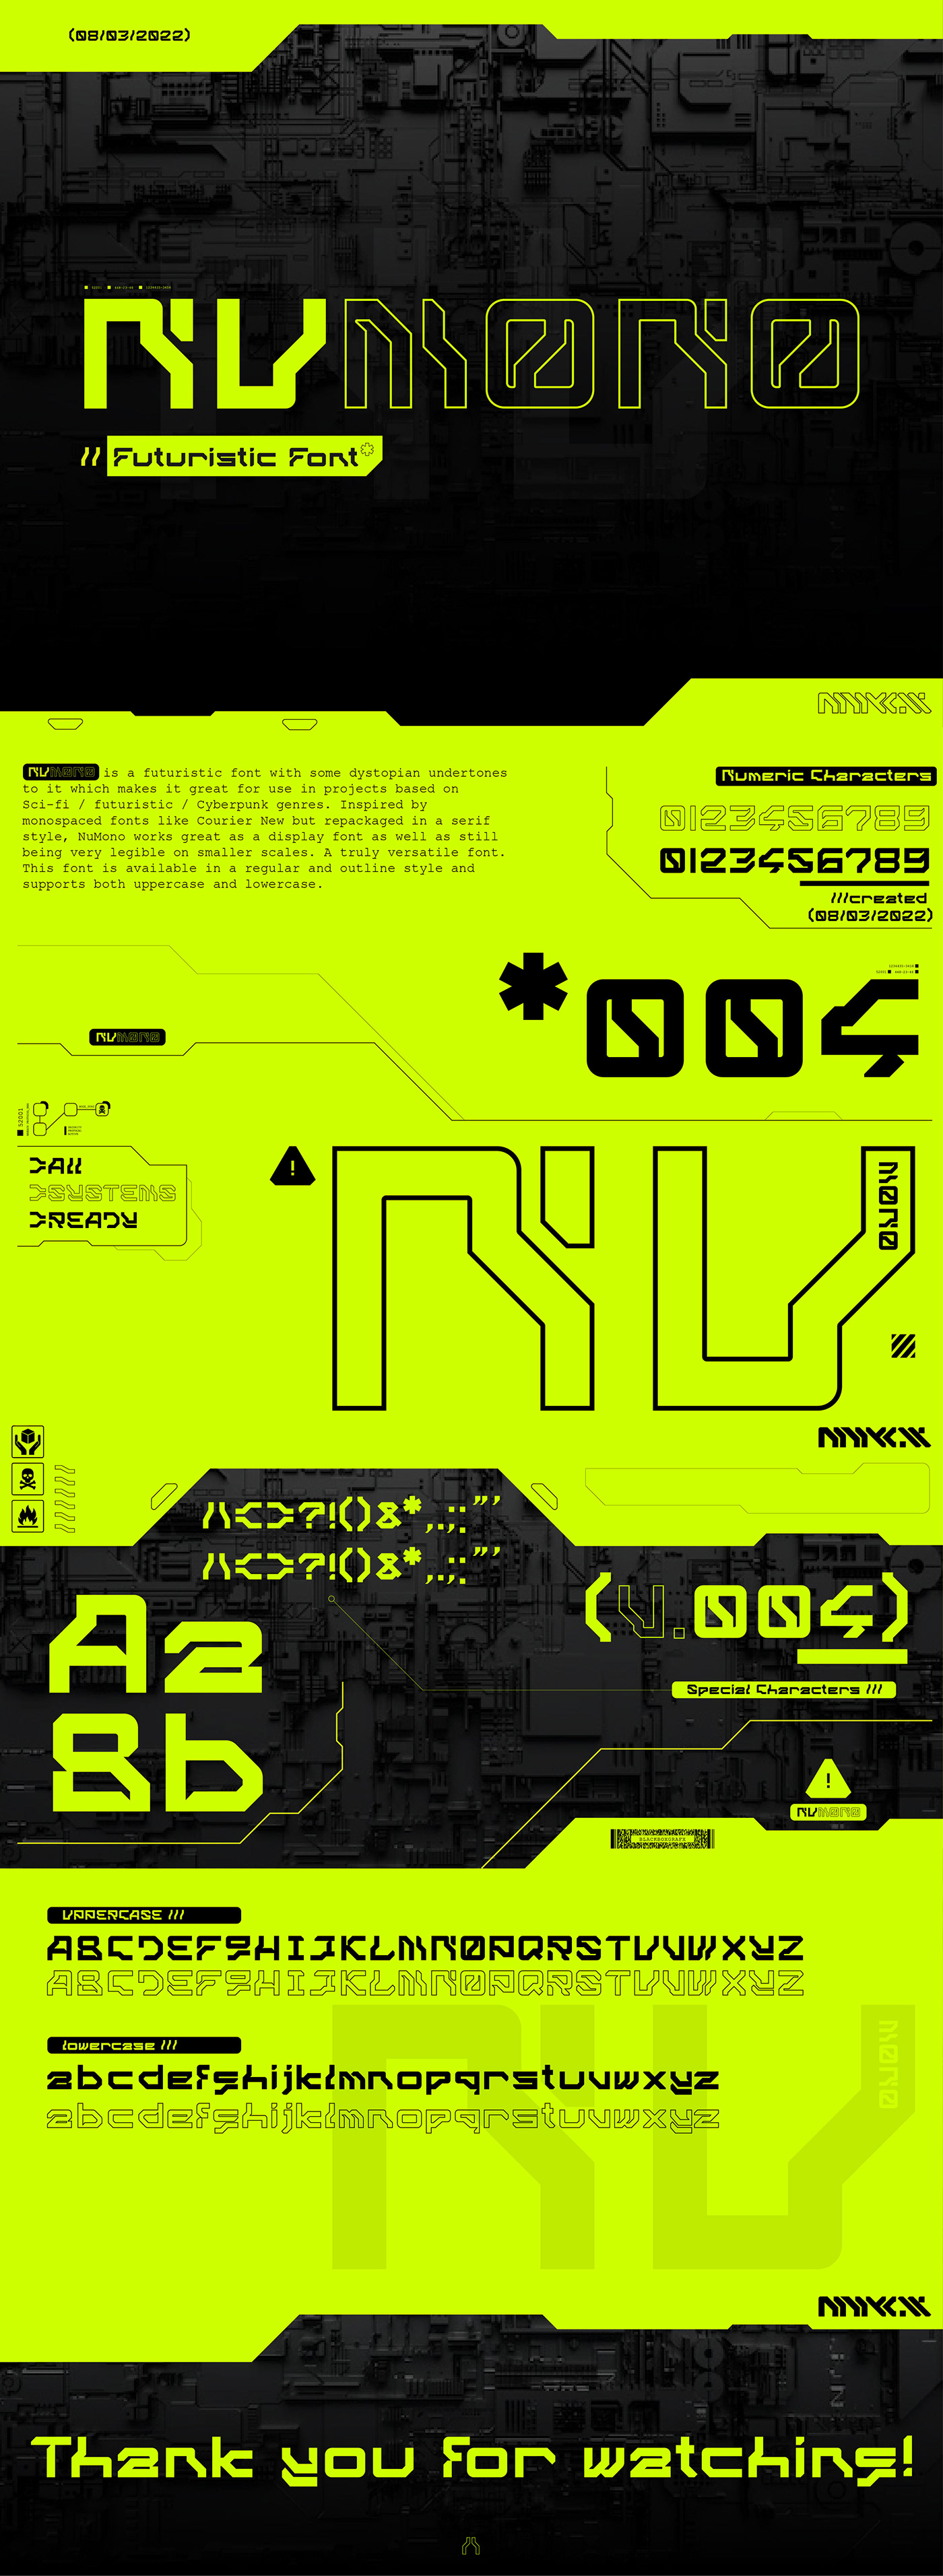 Cyberpunk Dystopia free Free font free fonts futuristic science fiction Scifi type Typeface